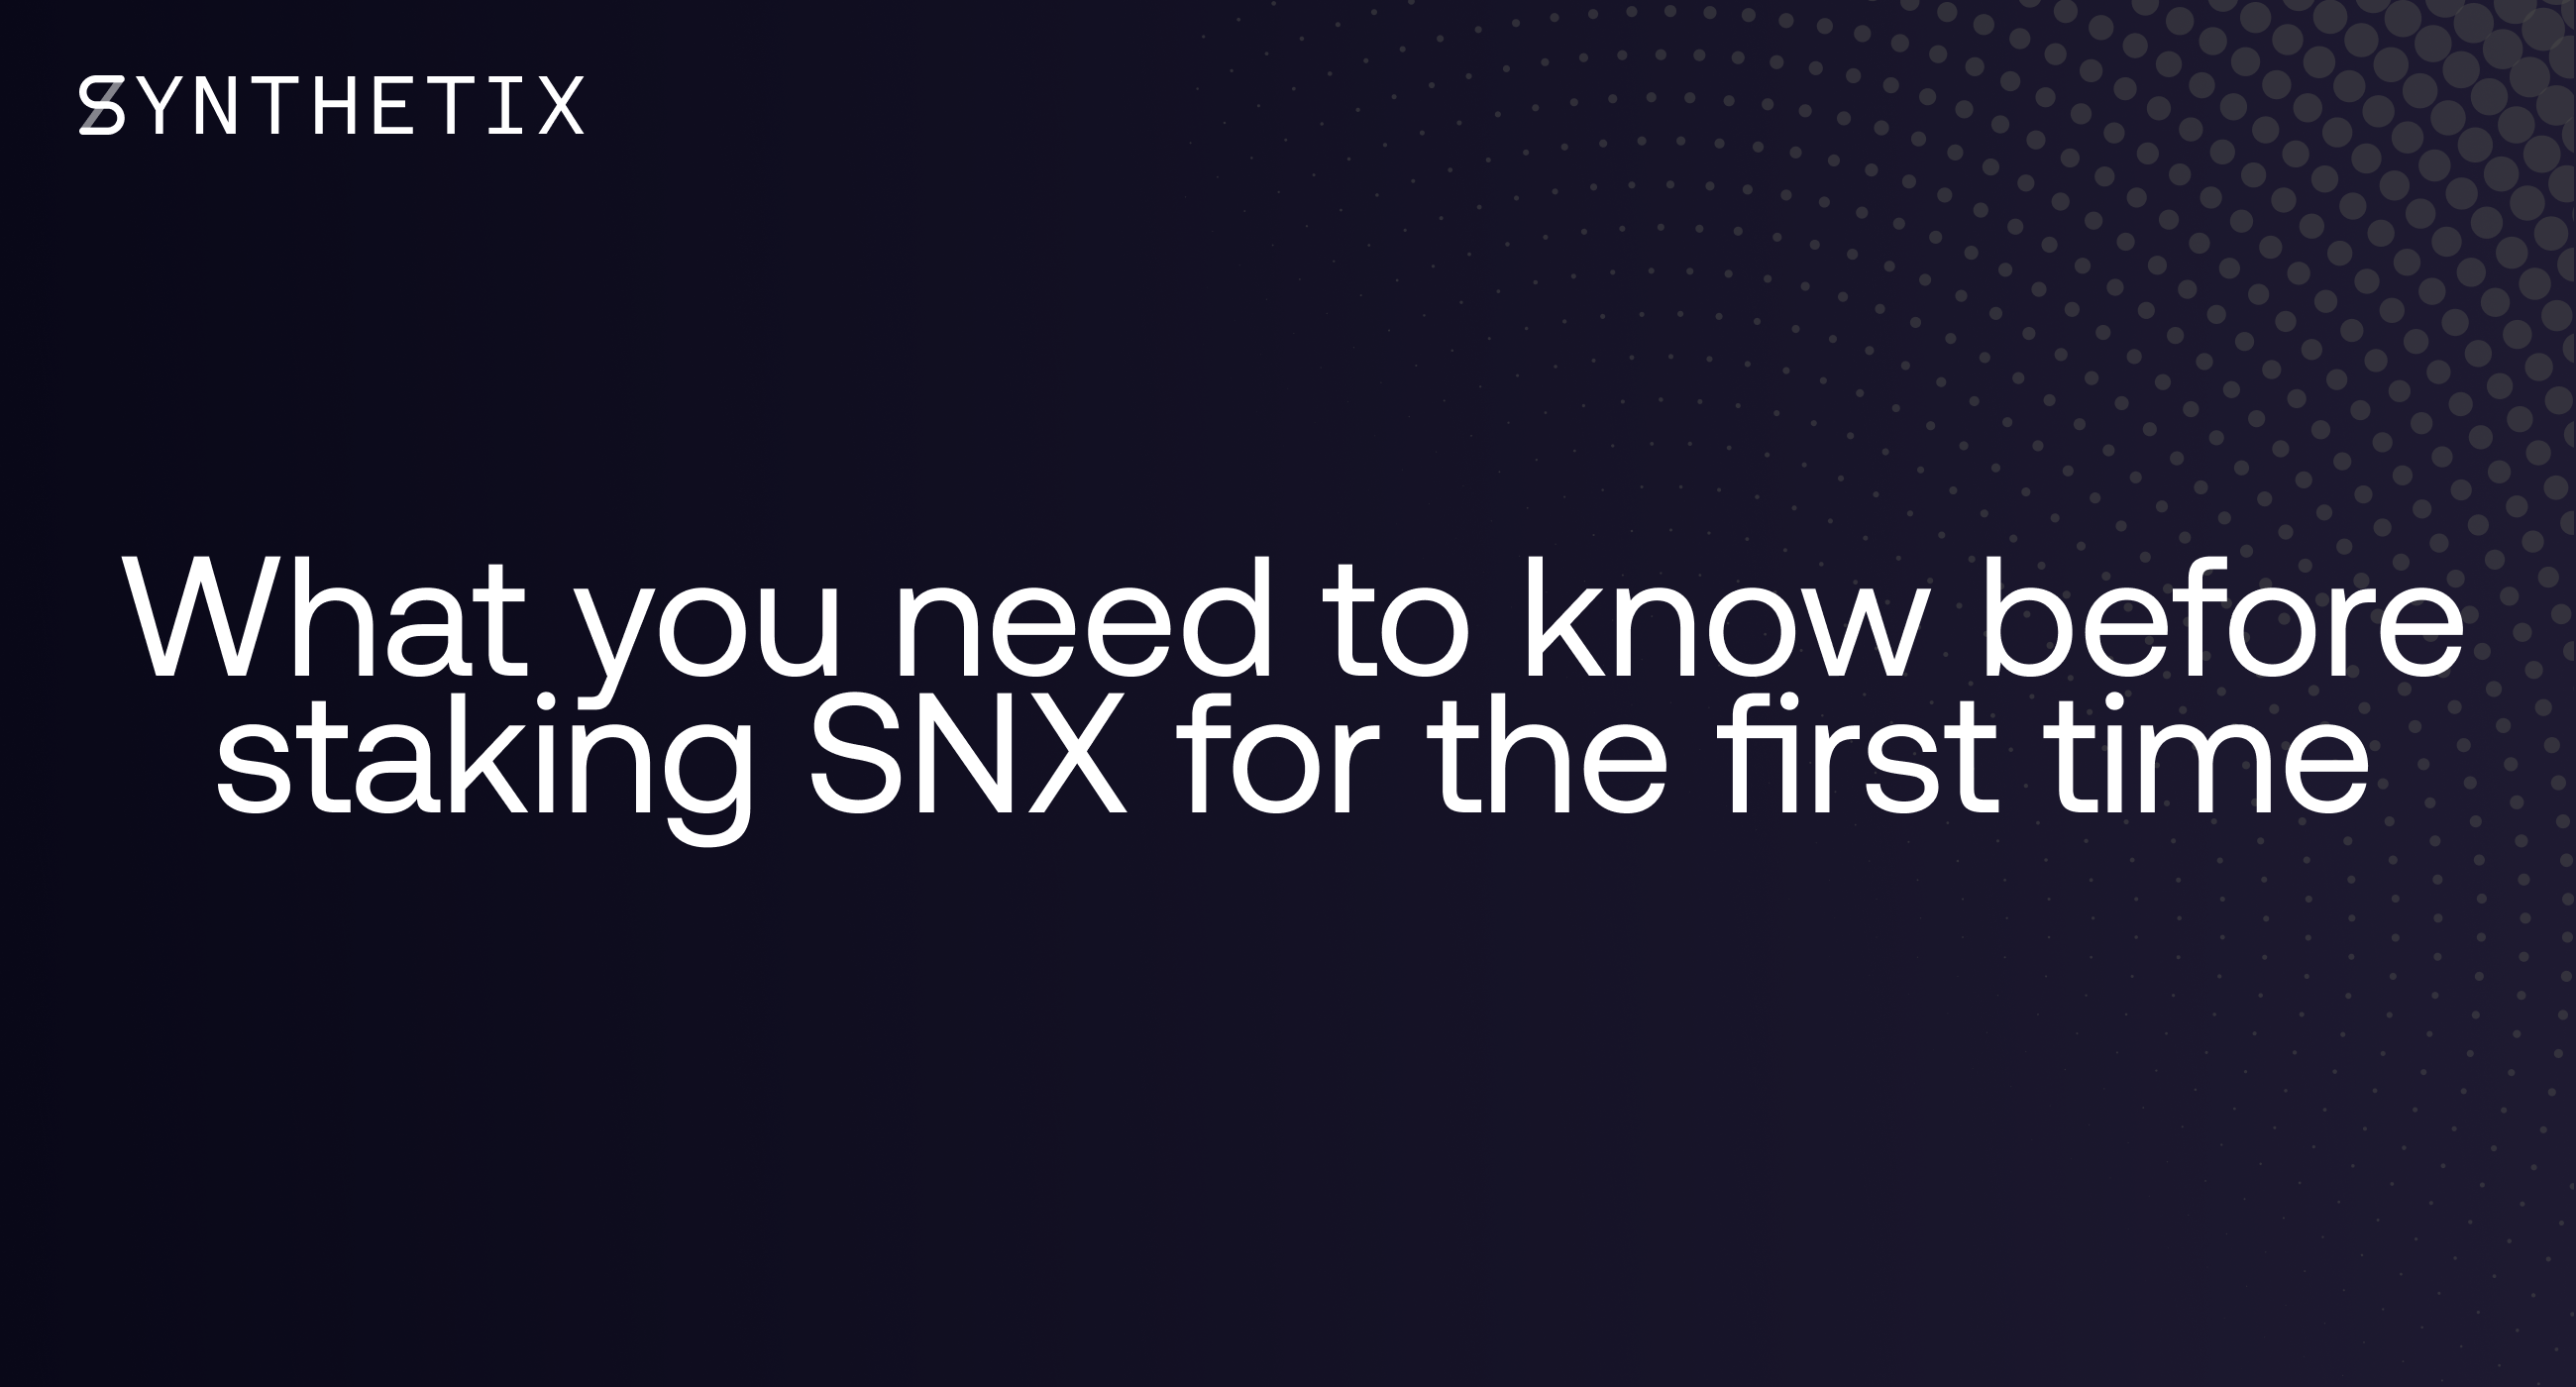 What you need to know before staking SNX for the first time